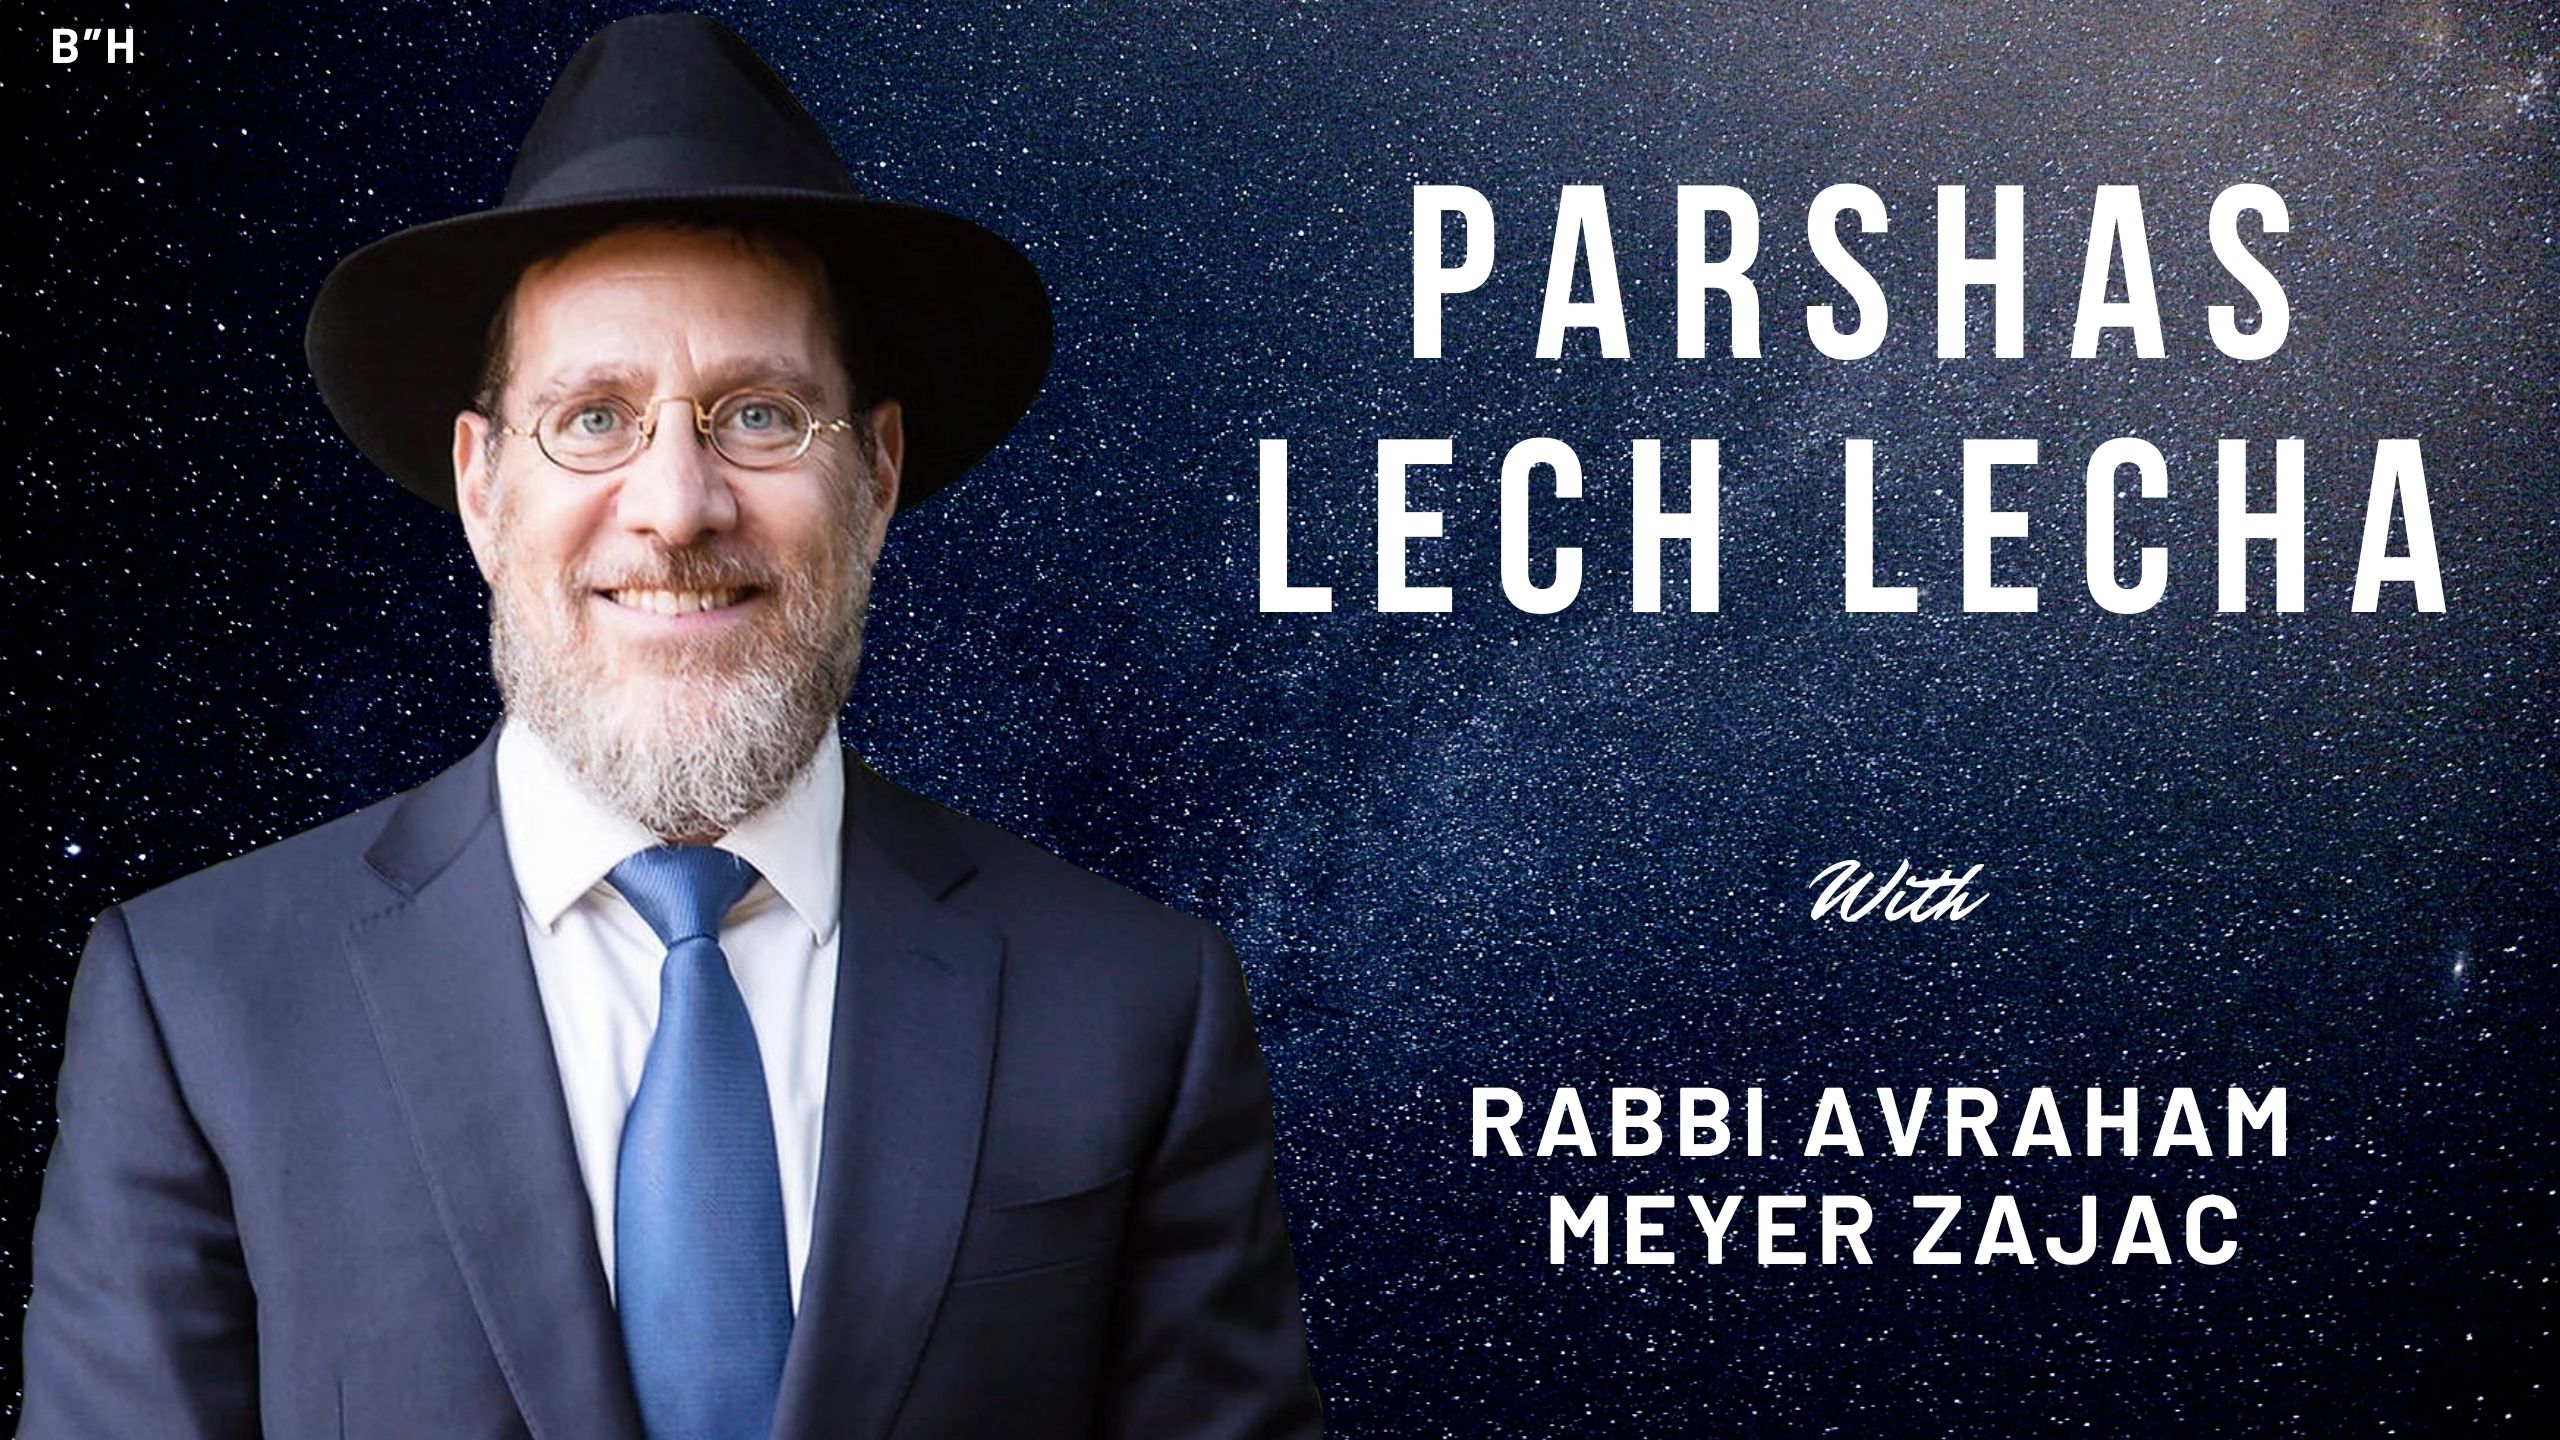 You are currently viewing Parshas Lech Lecha